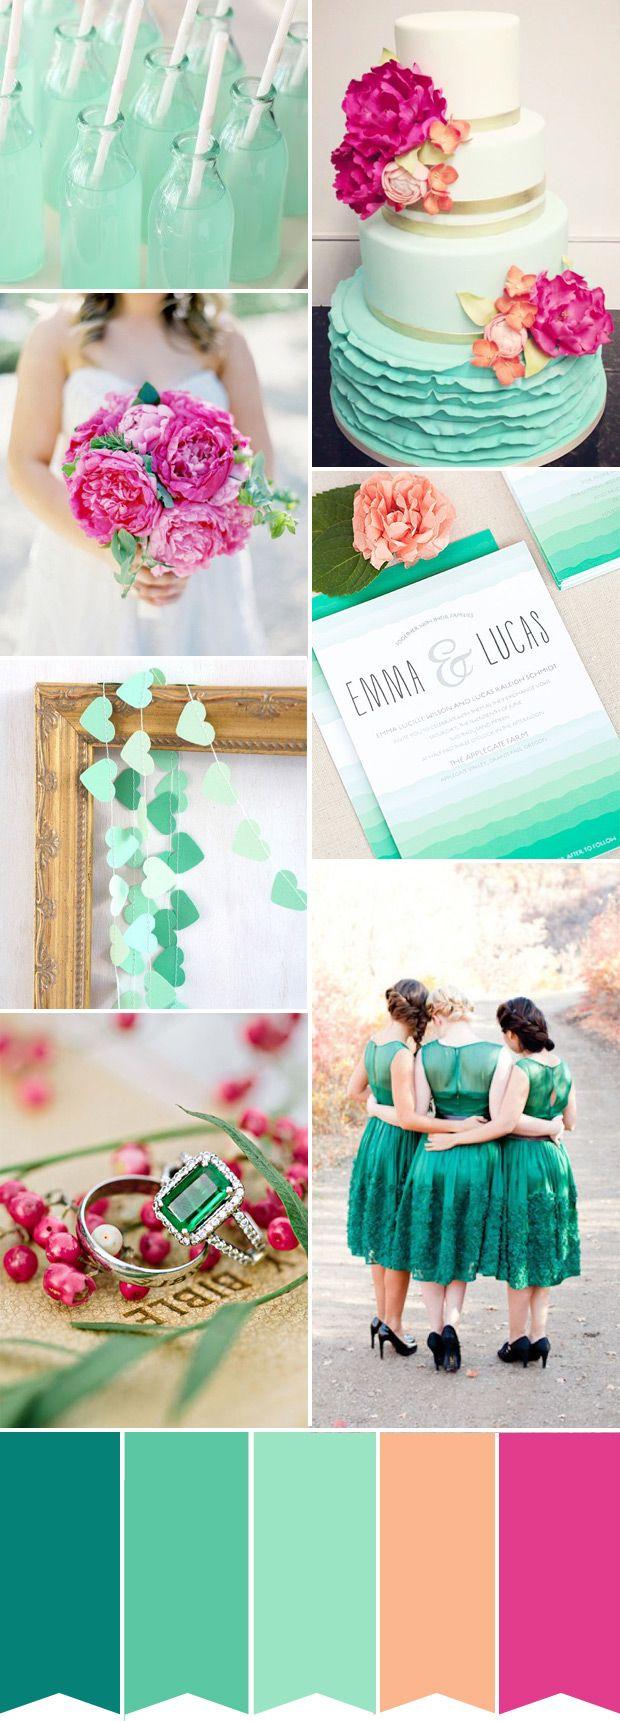 Wedding - Personal Favourites: Green And Pink Colour Palette